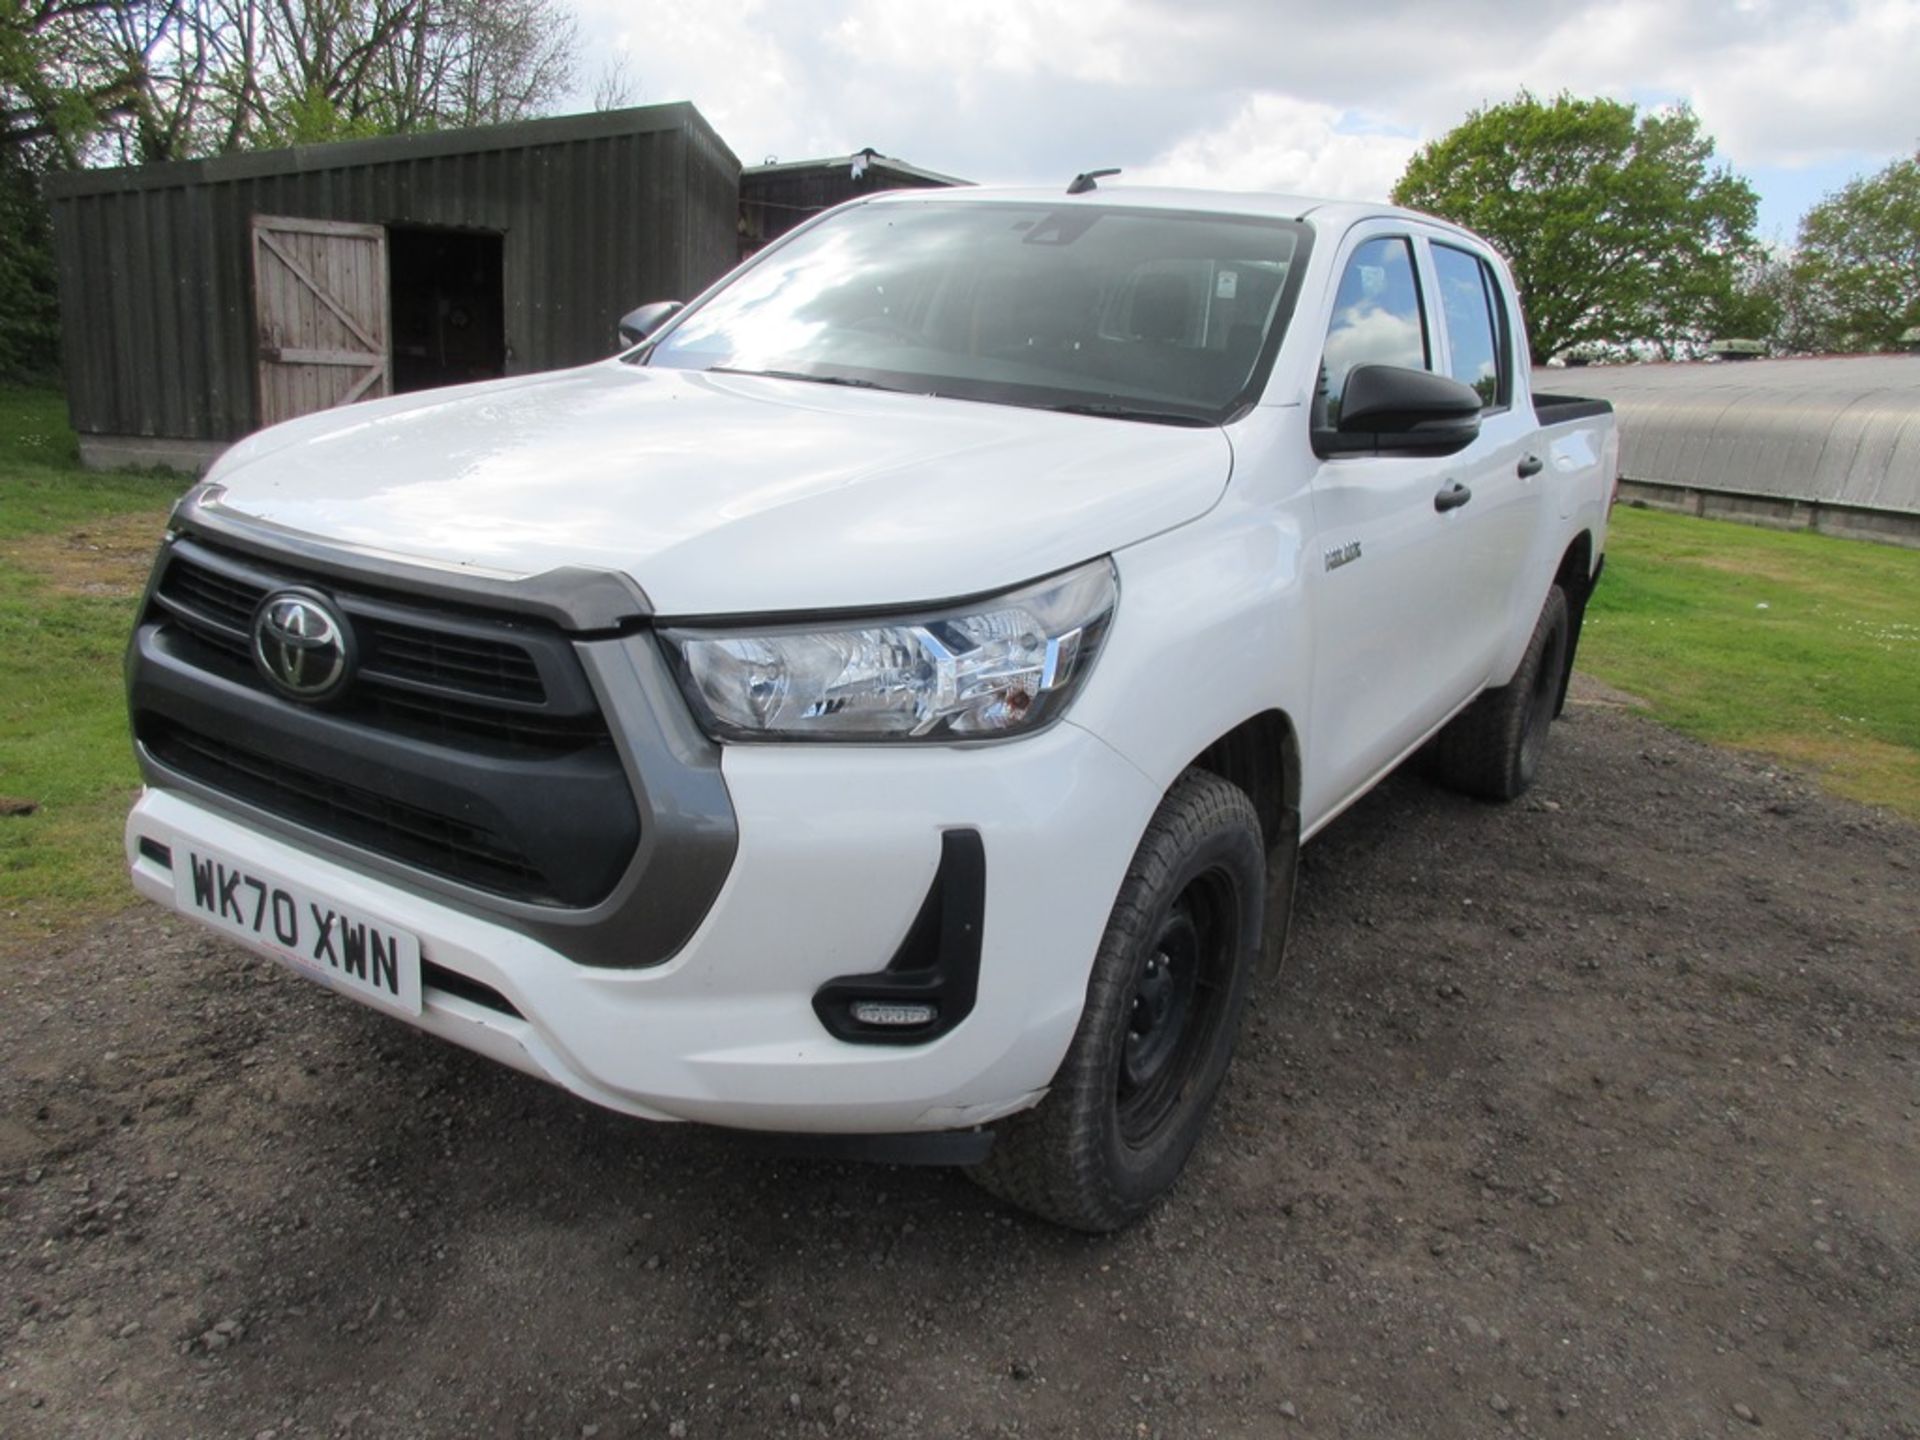 Toyota Hilux Active 2.4D-4D 4Wd Double Cab pickup, 147bhp (19/01/2021) - Image 2 of 18